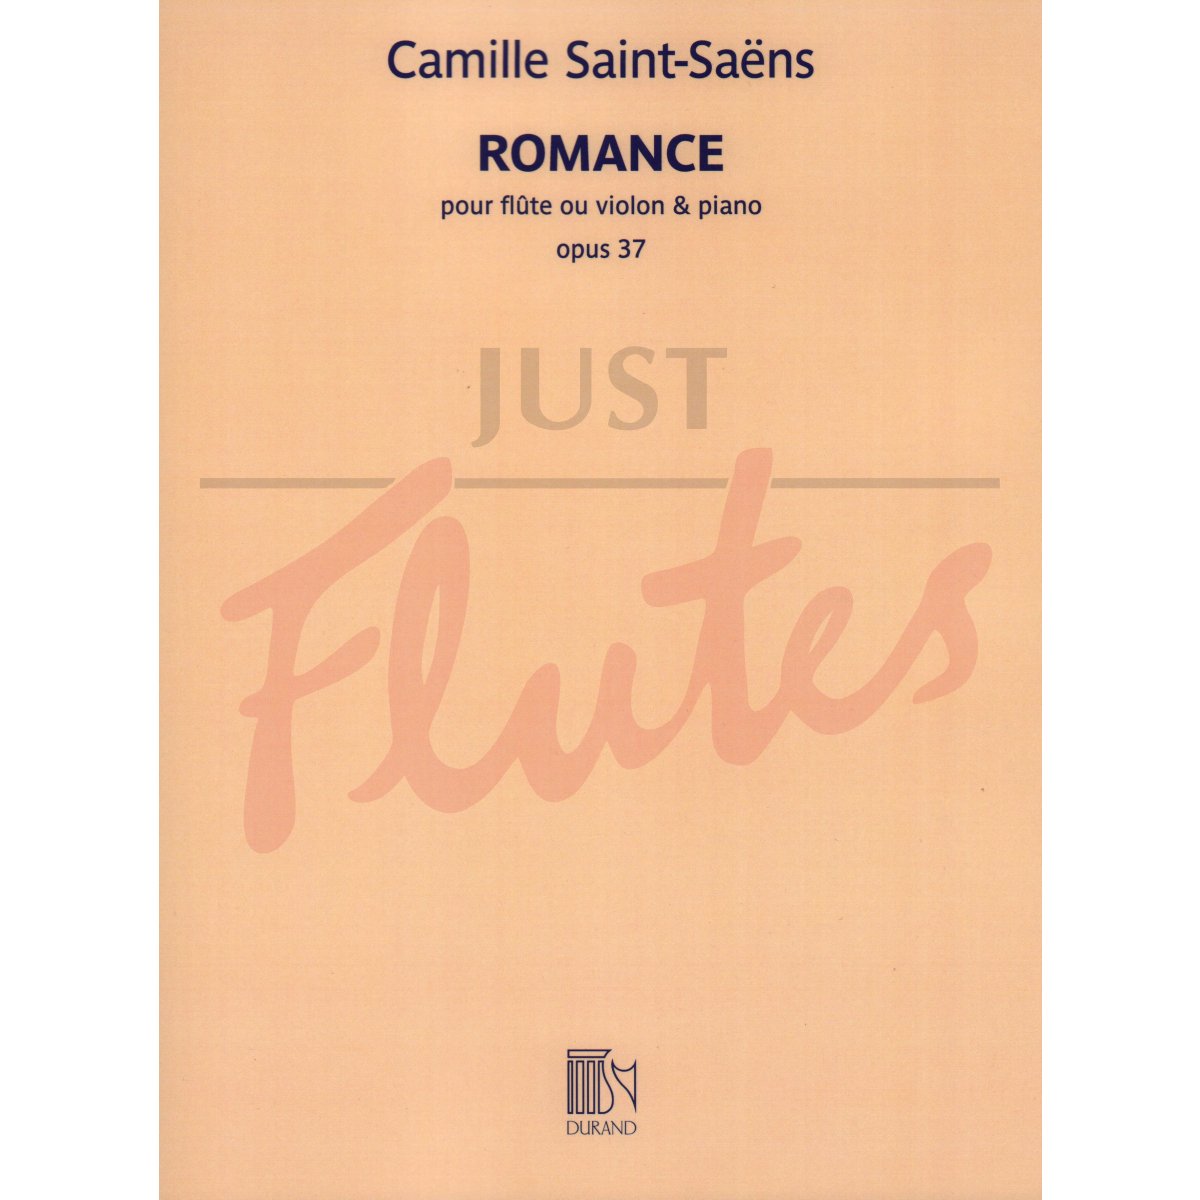 Romance for Flute and Piano, Op37 - C. Saint-Saëns. Just Flutes